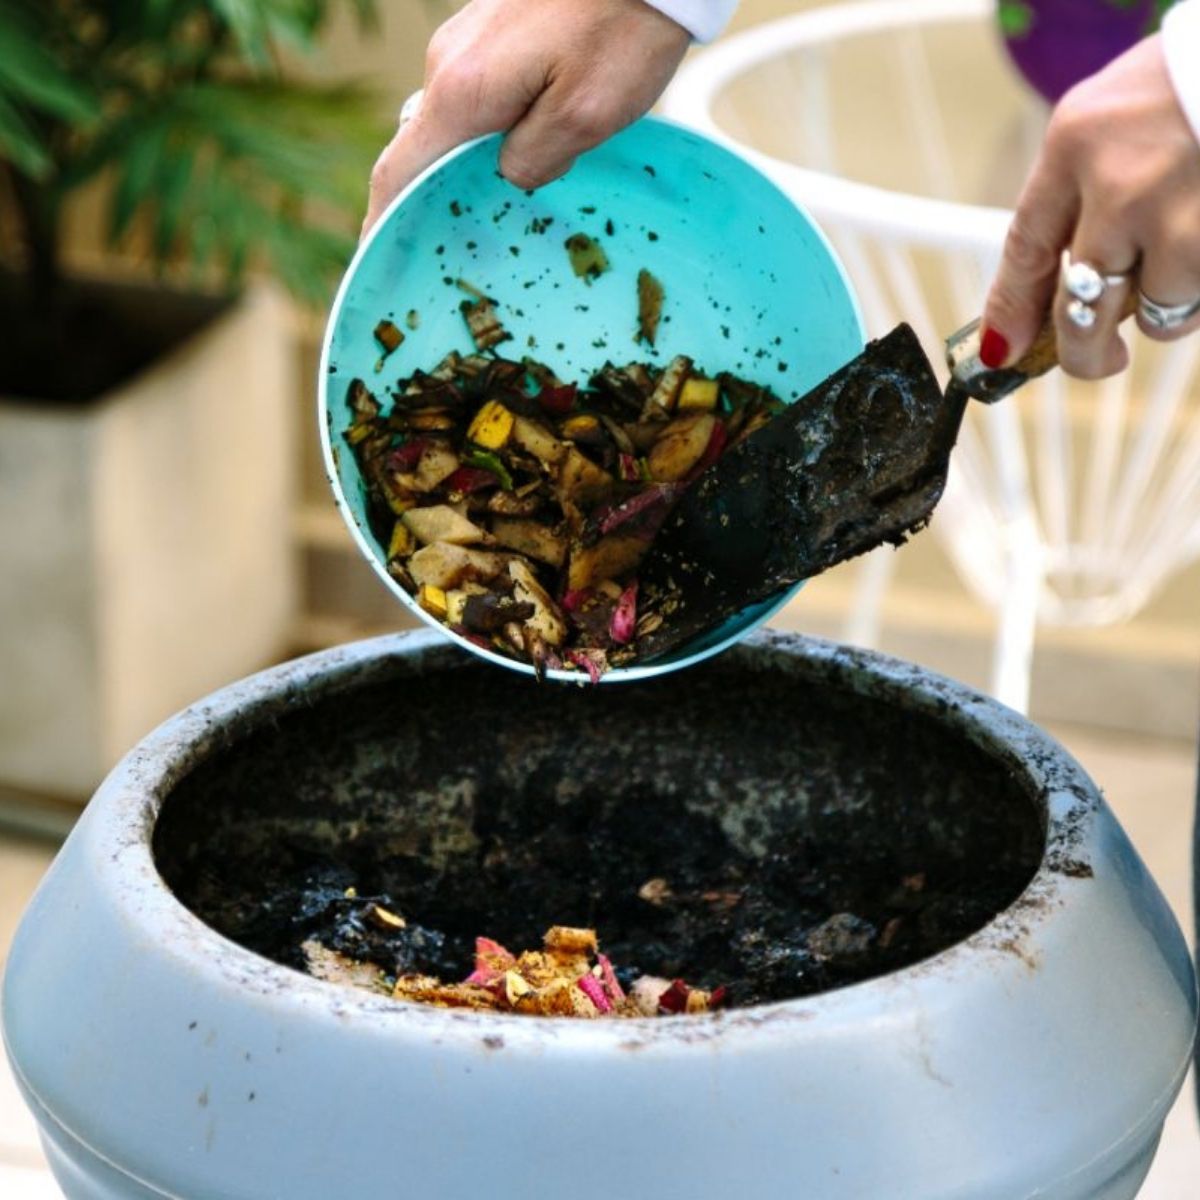 How to Make Compost from Kitchen Waste at Home